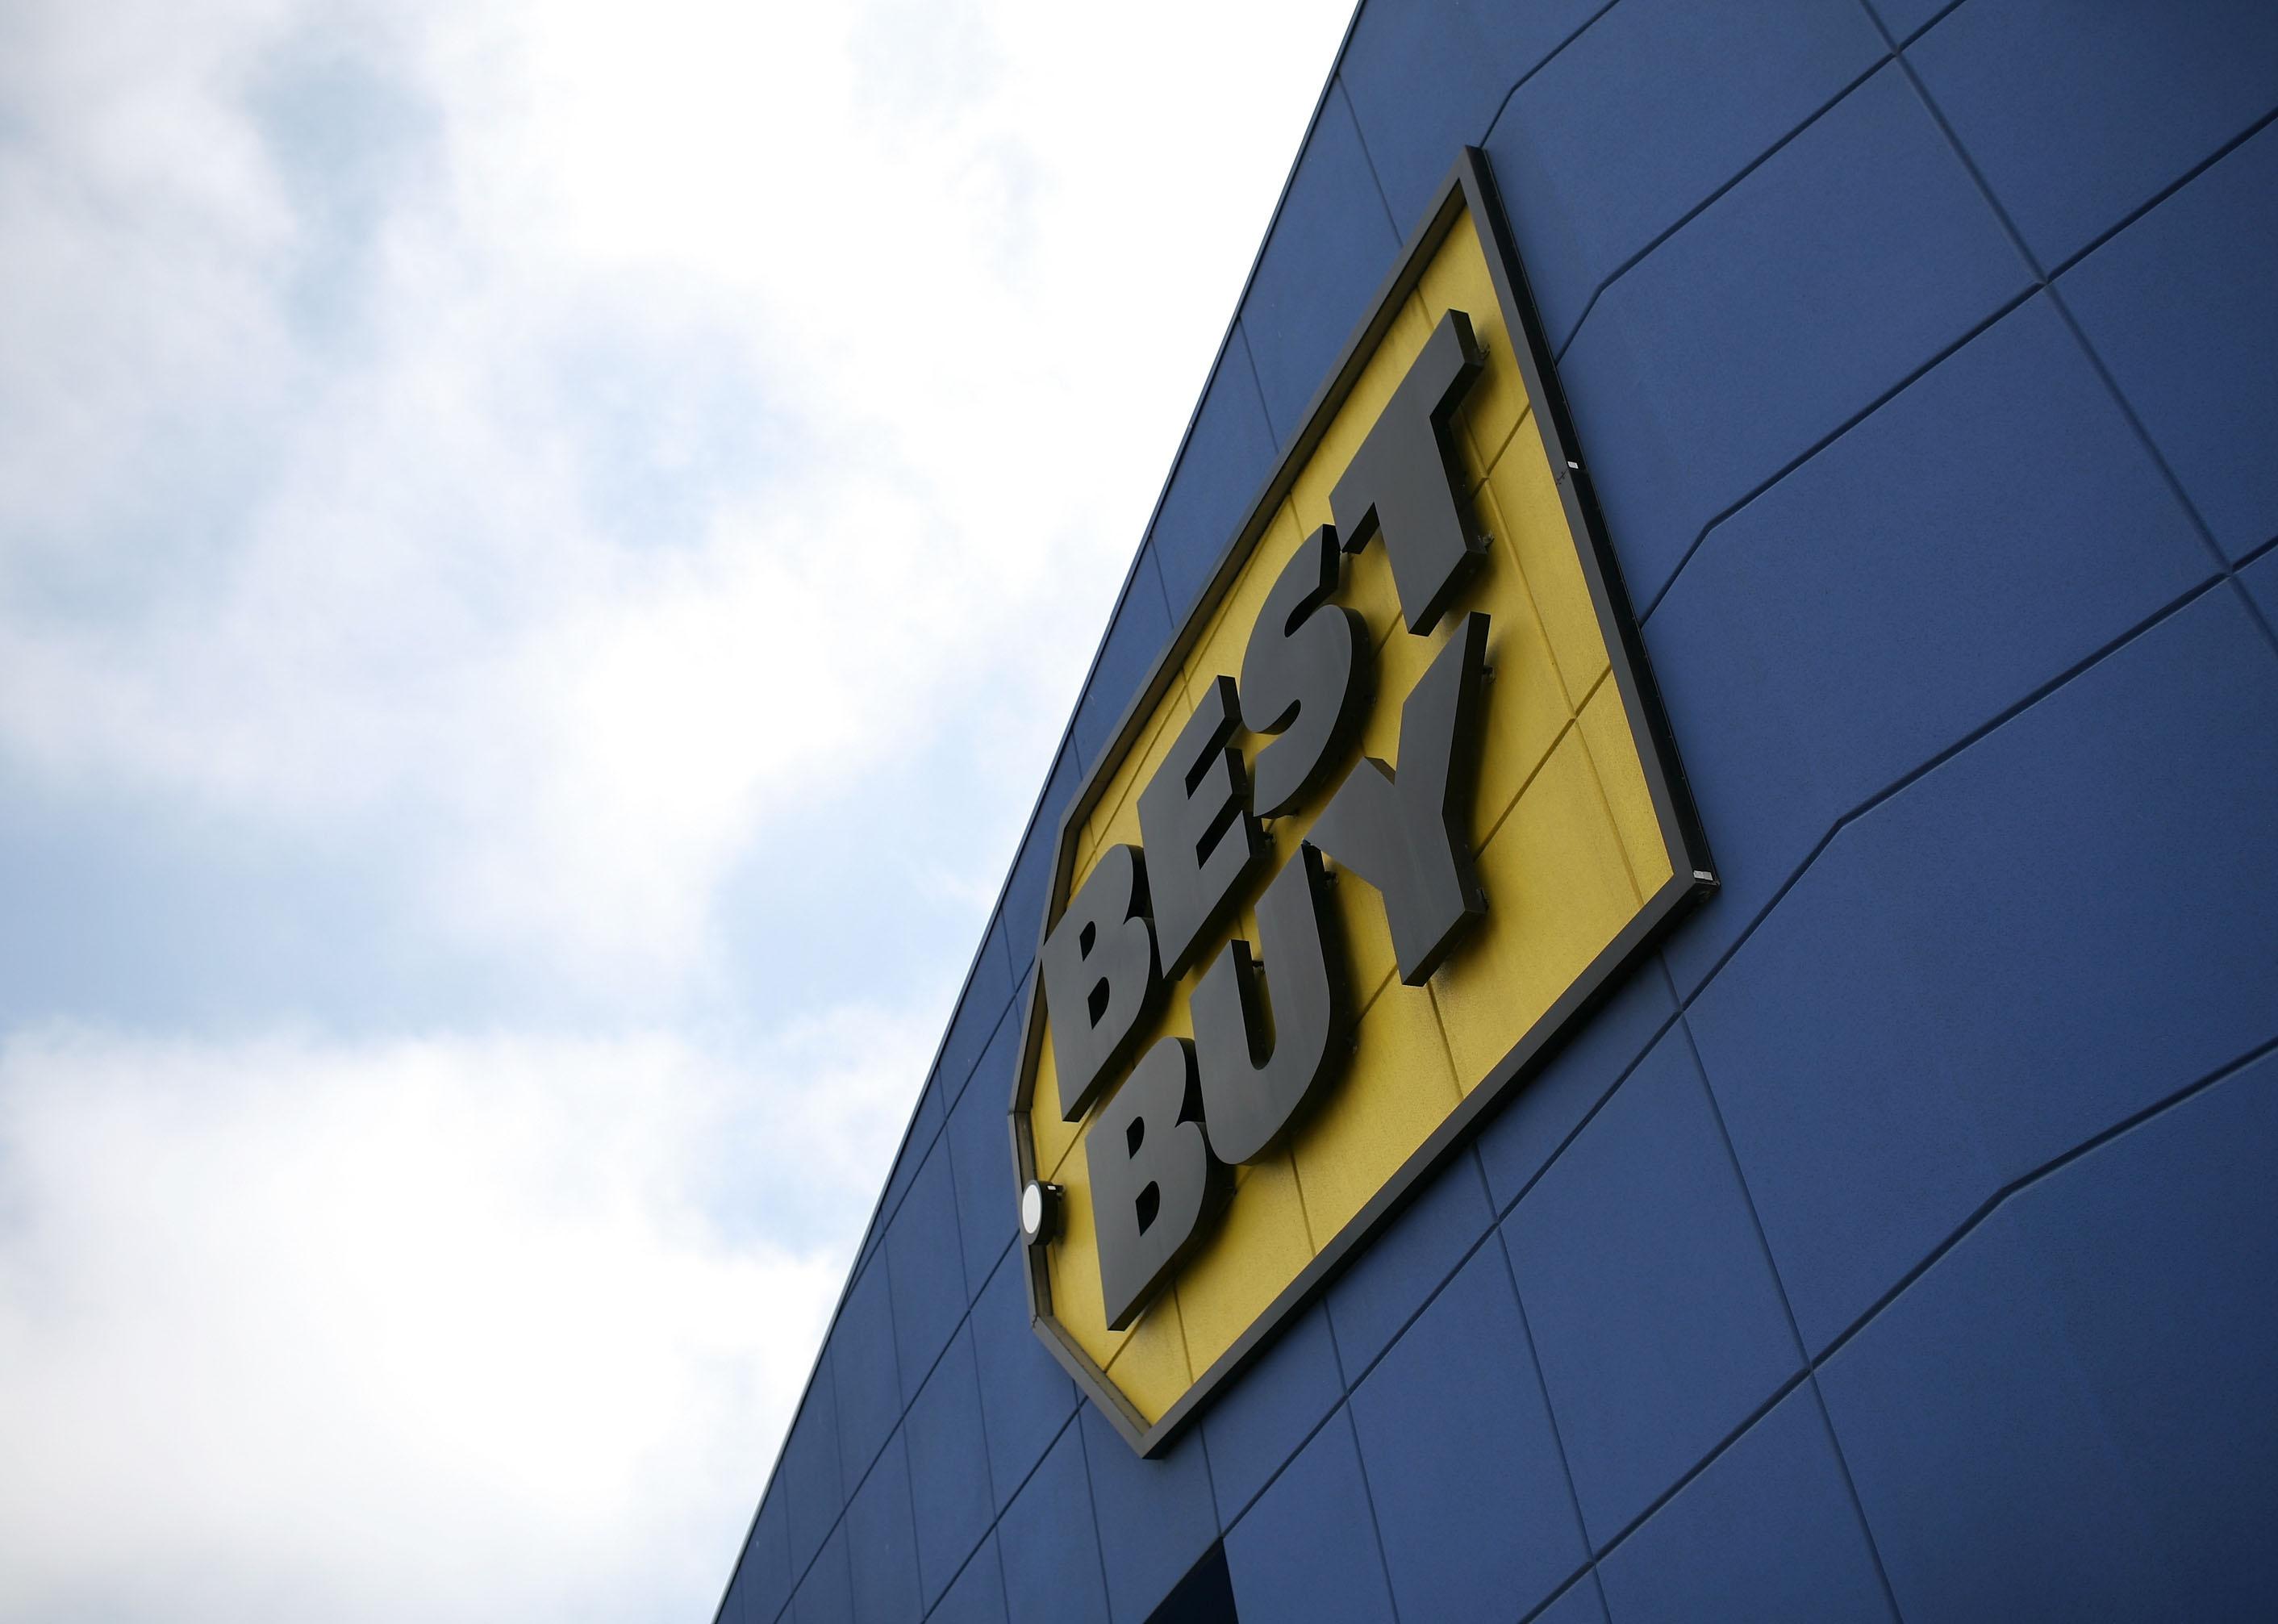 A black and yellow Best Buy sign on a blue building against a blue sky with clouds.